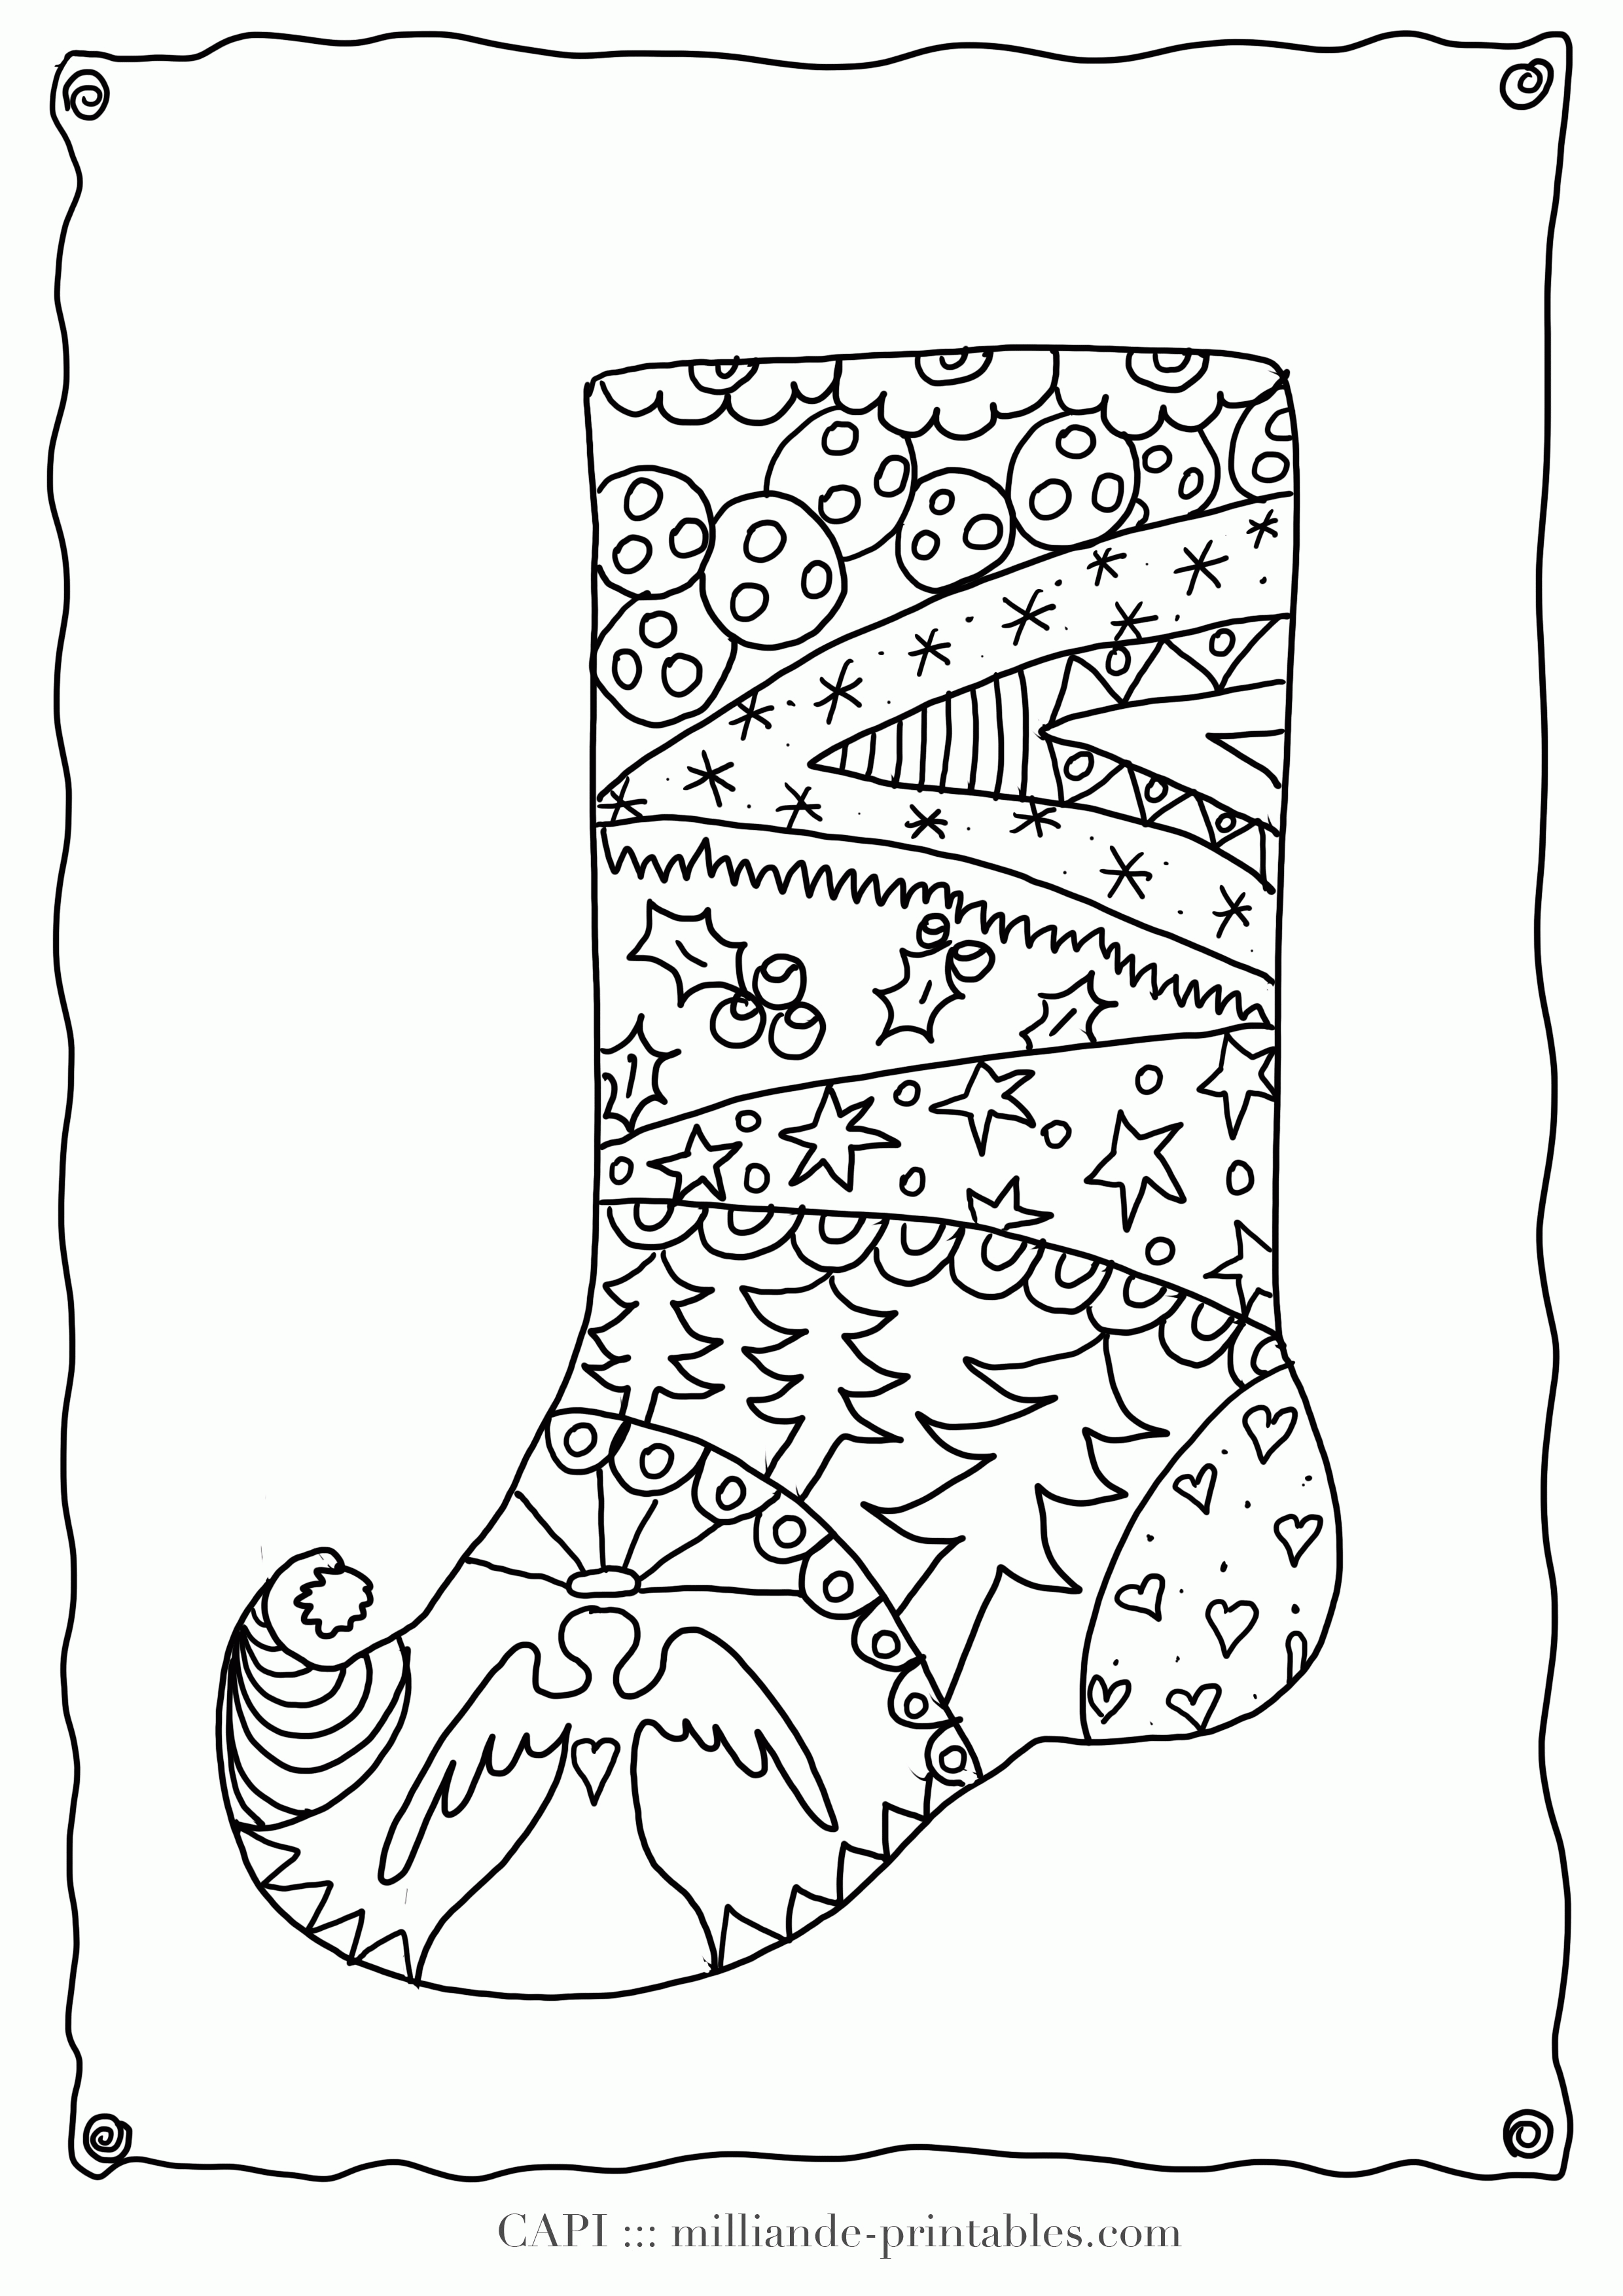 Xmas Coloring Pages Free Printable   Coloring Home